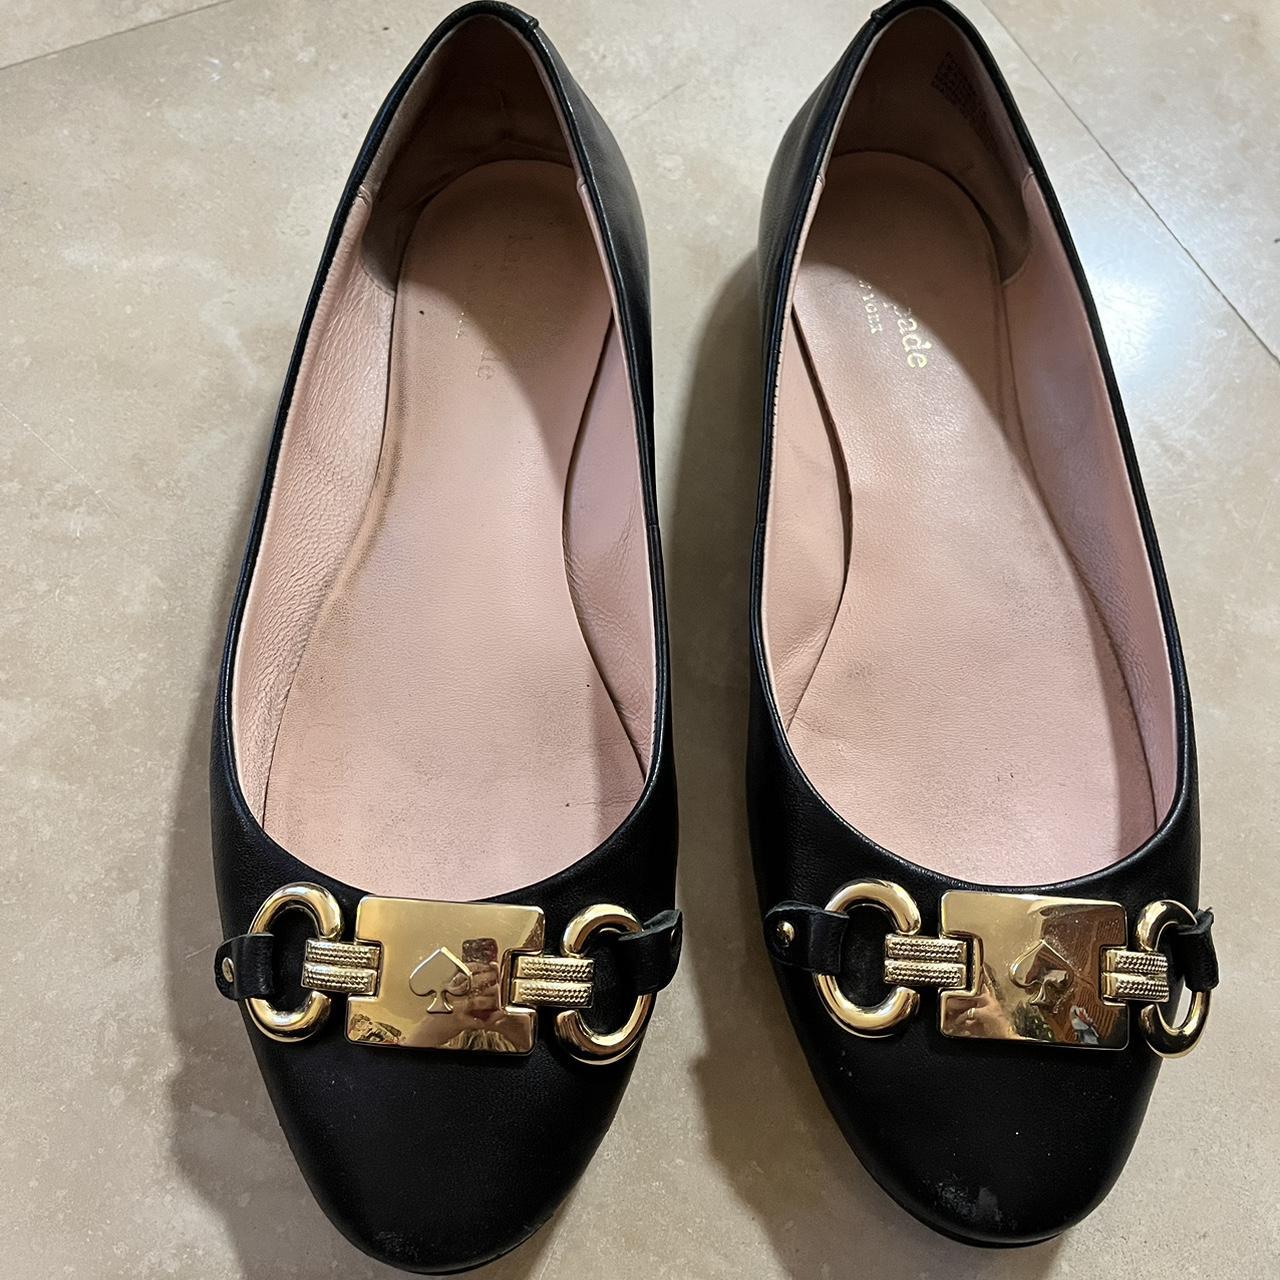 Kate Spade Phoebe Flats leather! Size 7.5 in... - Depop